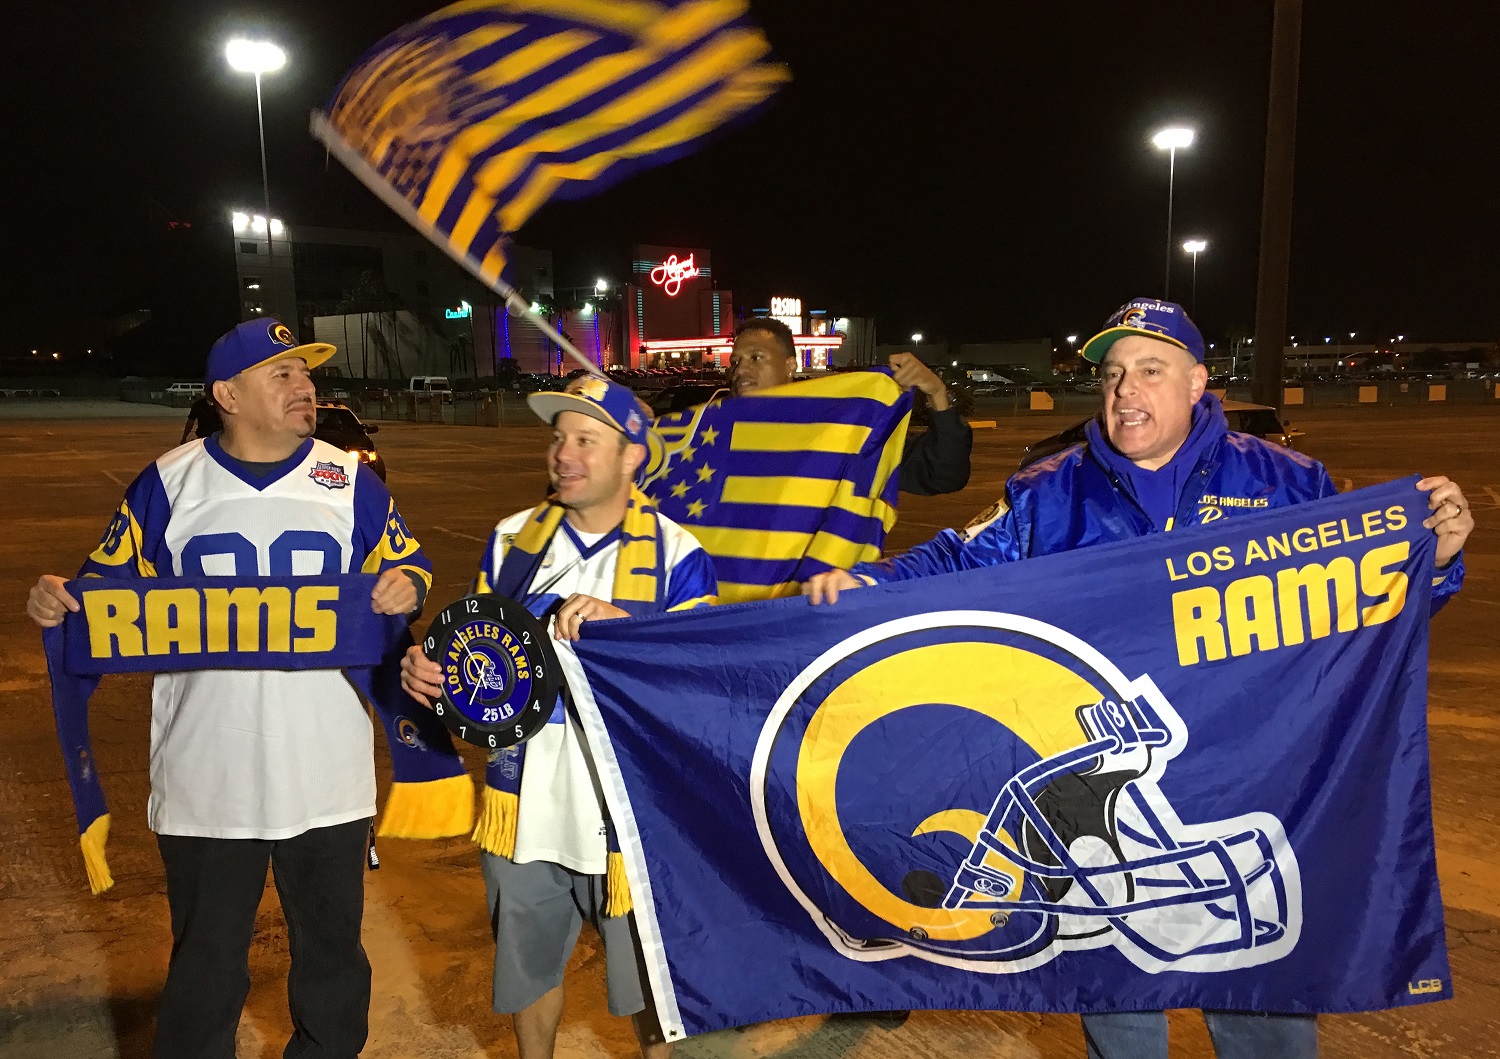 Football fans cheer for the return of the Rams to Los Angeles on the site of the old Hollywood Park horse-racing track in Inglewood, Calif., on Tuesday, Jan. 12, 2016. NFL owners voted Tuesday night to allow the St. Louis Rams to move to a new stadium at the site just outside Los Angeles, and the San Diego Chargers will have an option to share the facility. (AP Photo/Damian Dovarganes)